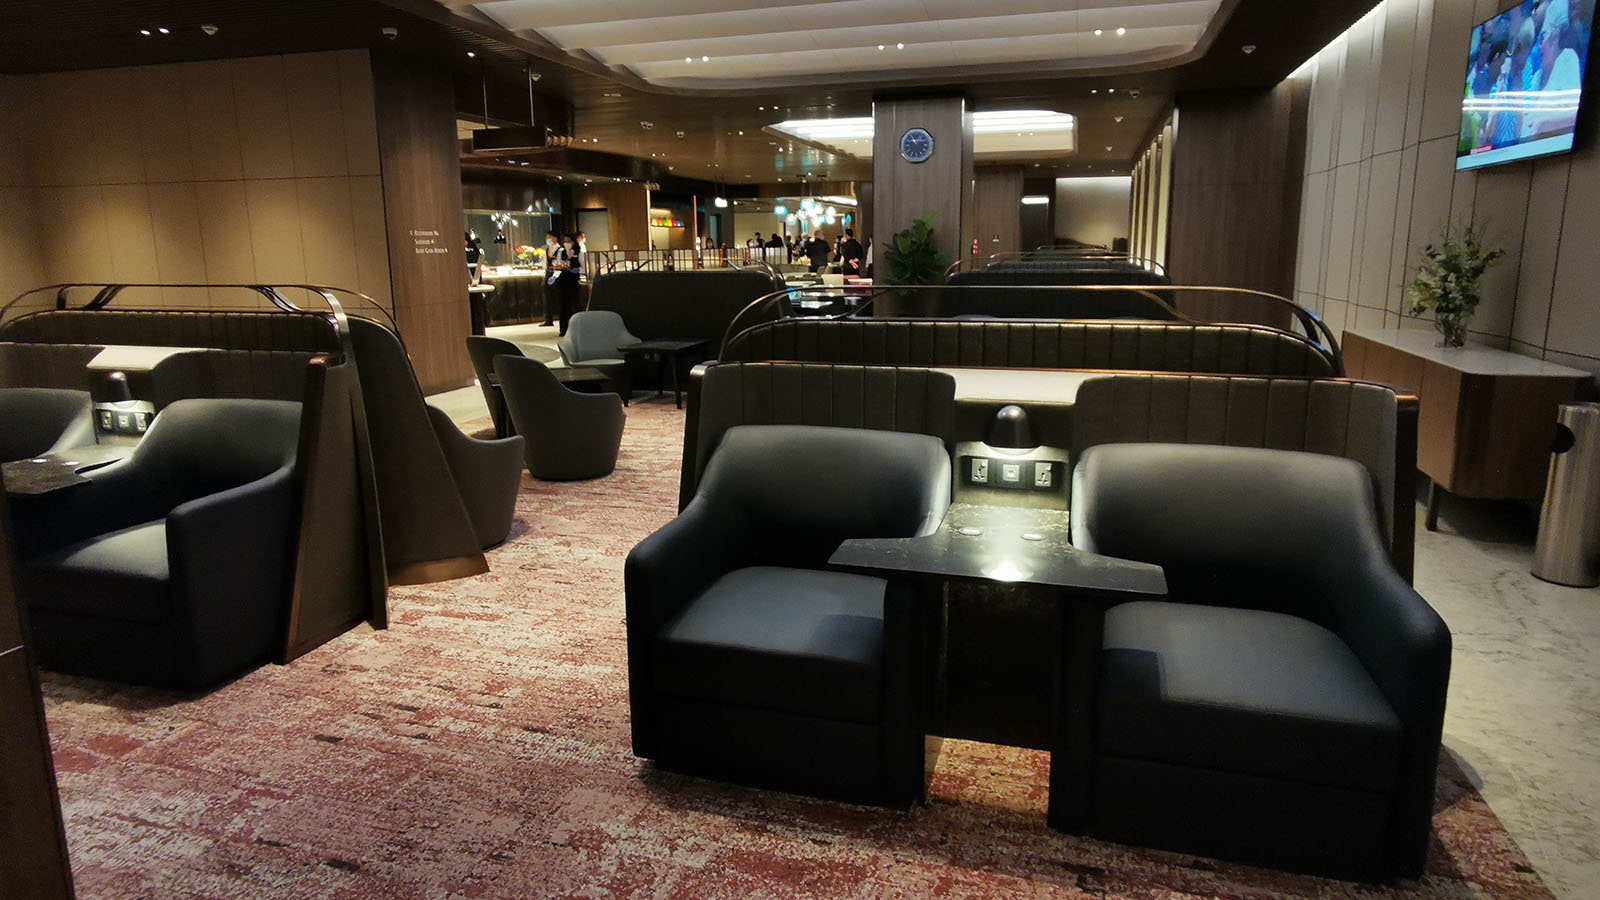 Singapore Airlines' SilverKris First Class Lounge